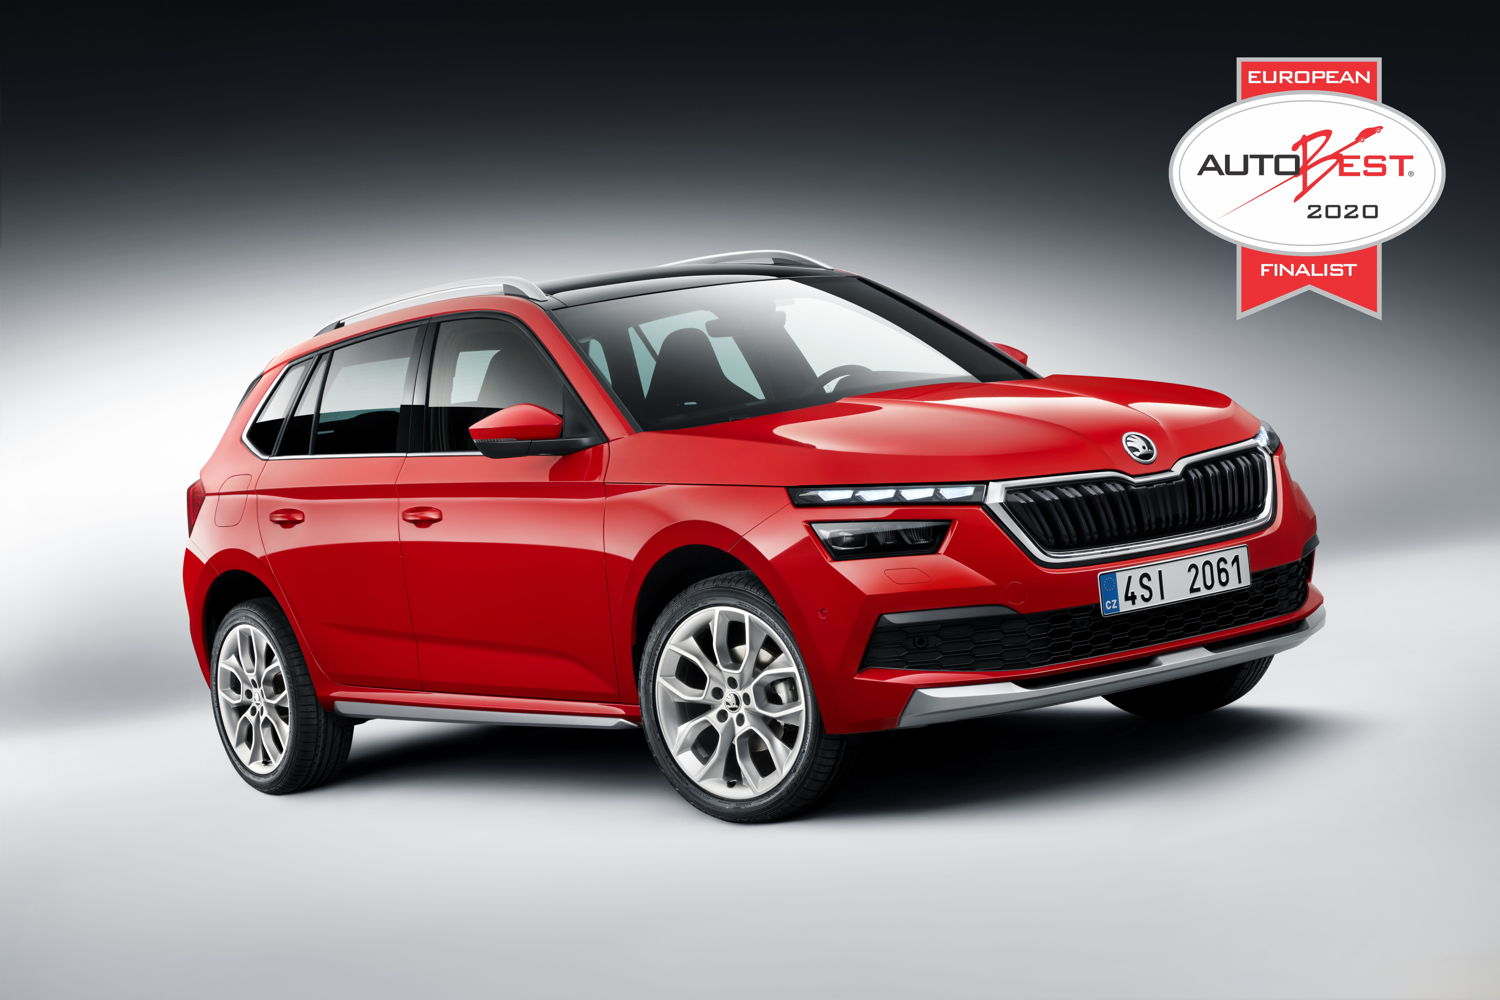 The new ŠKODA KAMIQ city SUV is among the five finalists for the European AUTOBEST "Best Buy Car of Europe 2020" award.